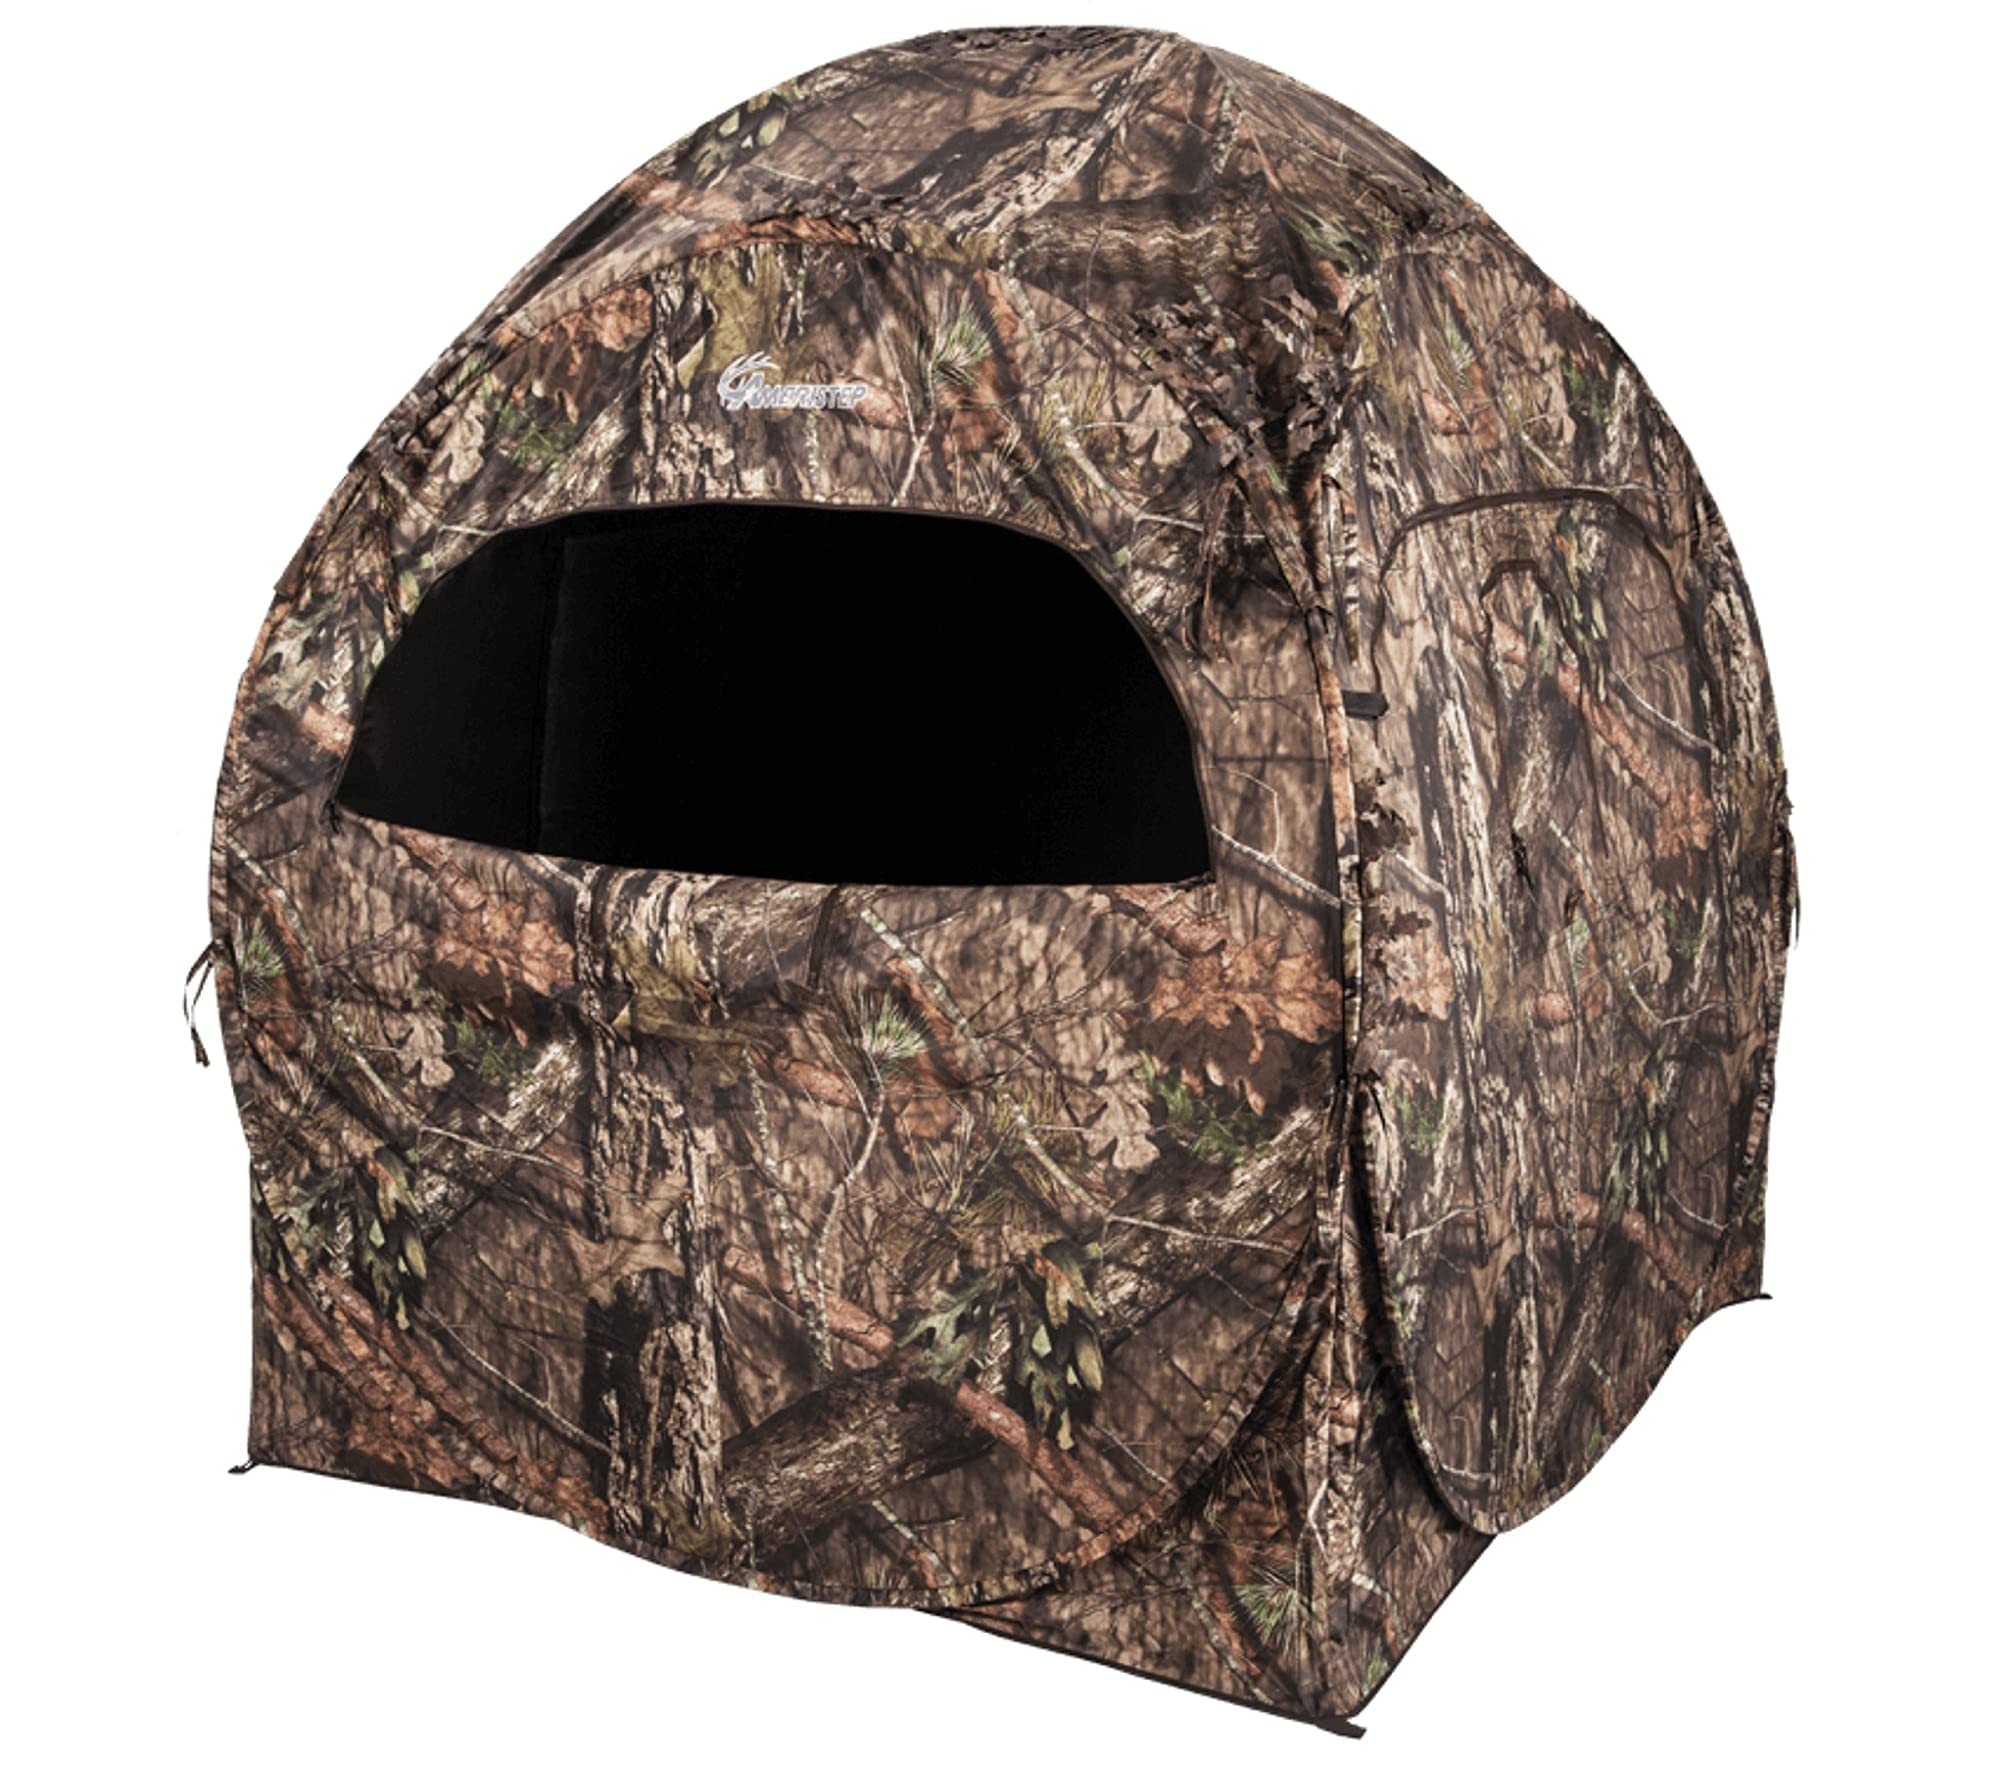 Ameristep Doghouse Lightweight Durable Hunting Spring Steel Ground Blind with Backpack Carrying Case - 2 Hunters Concealment - Easy Setup & Takedown